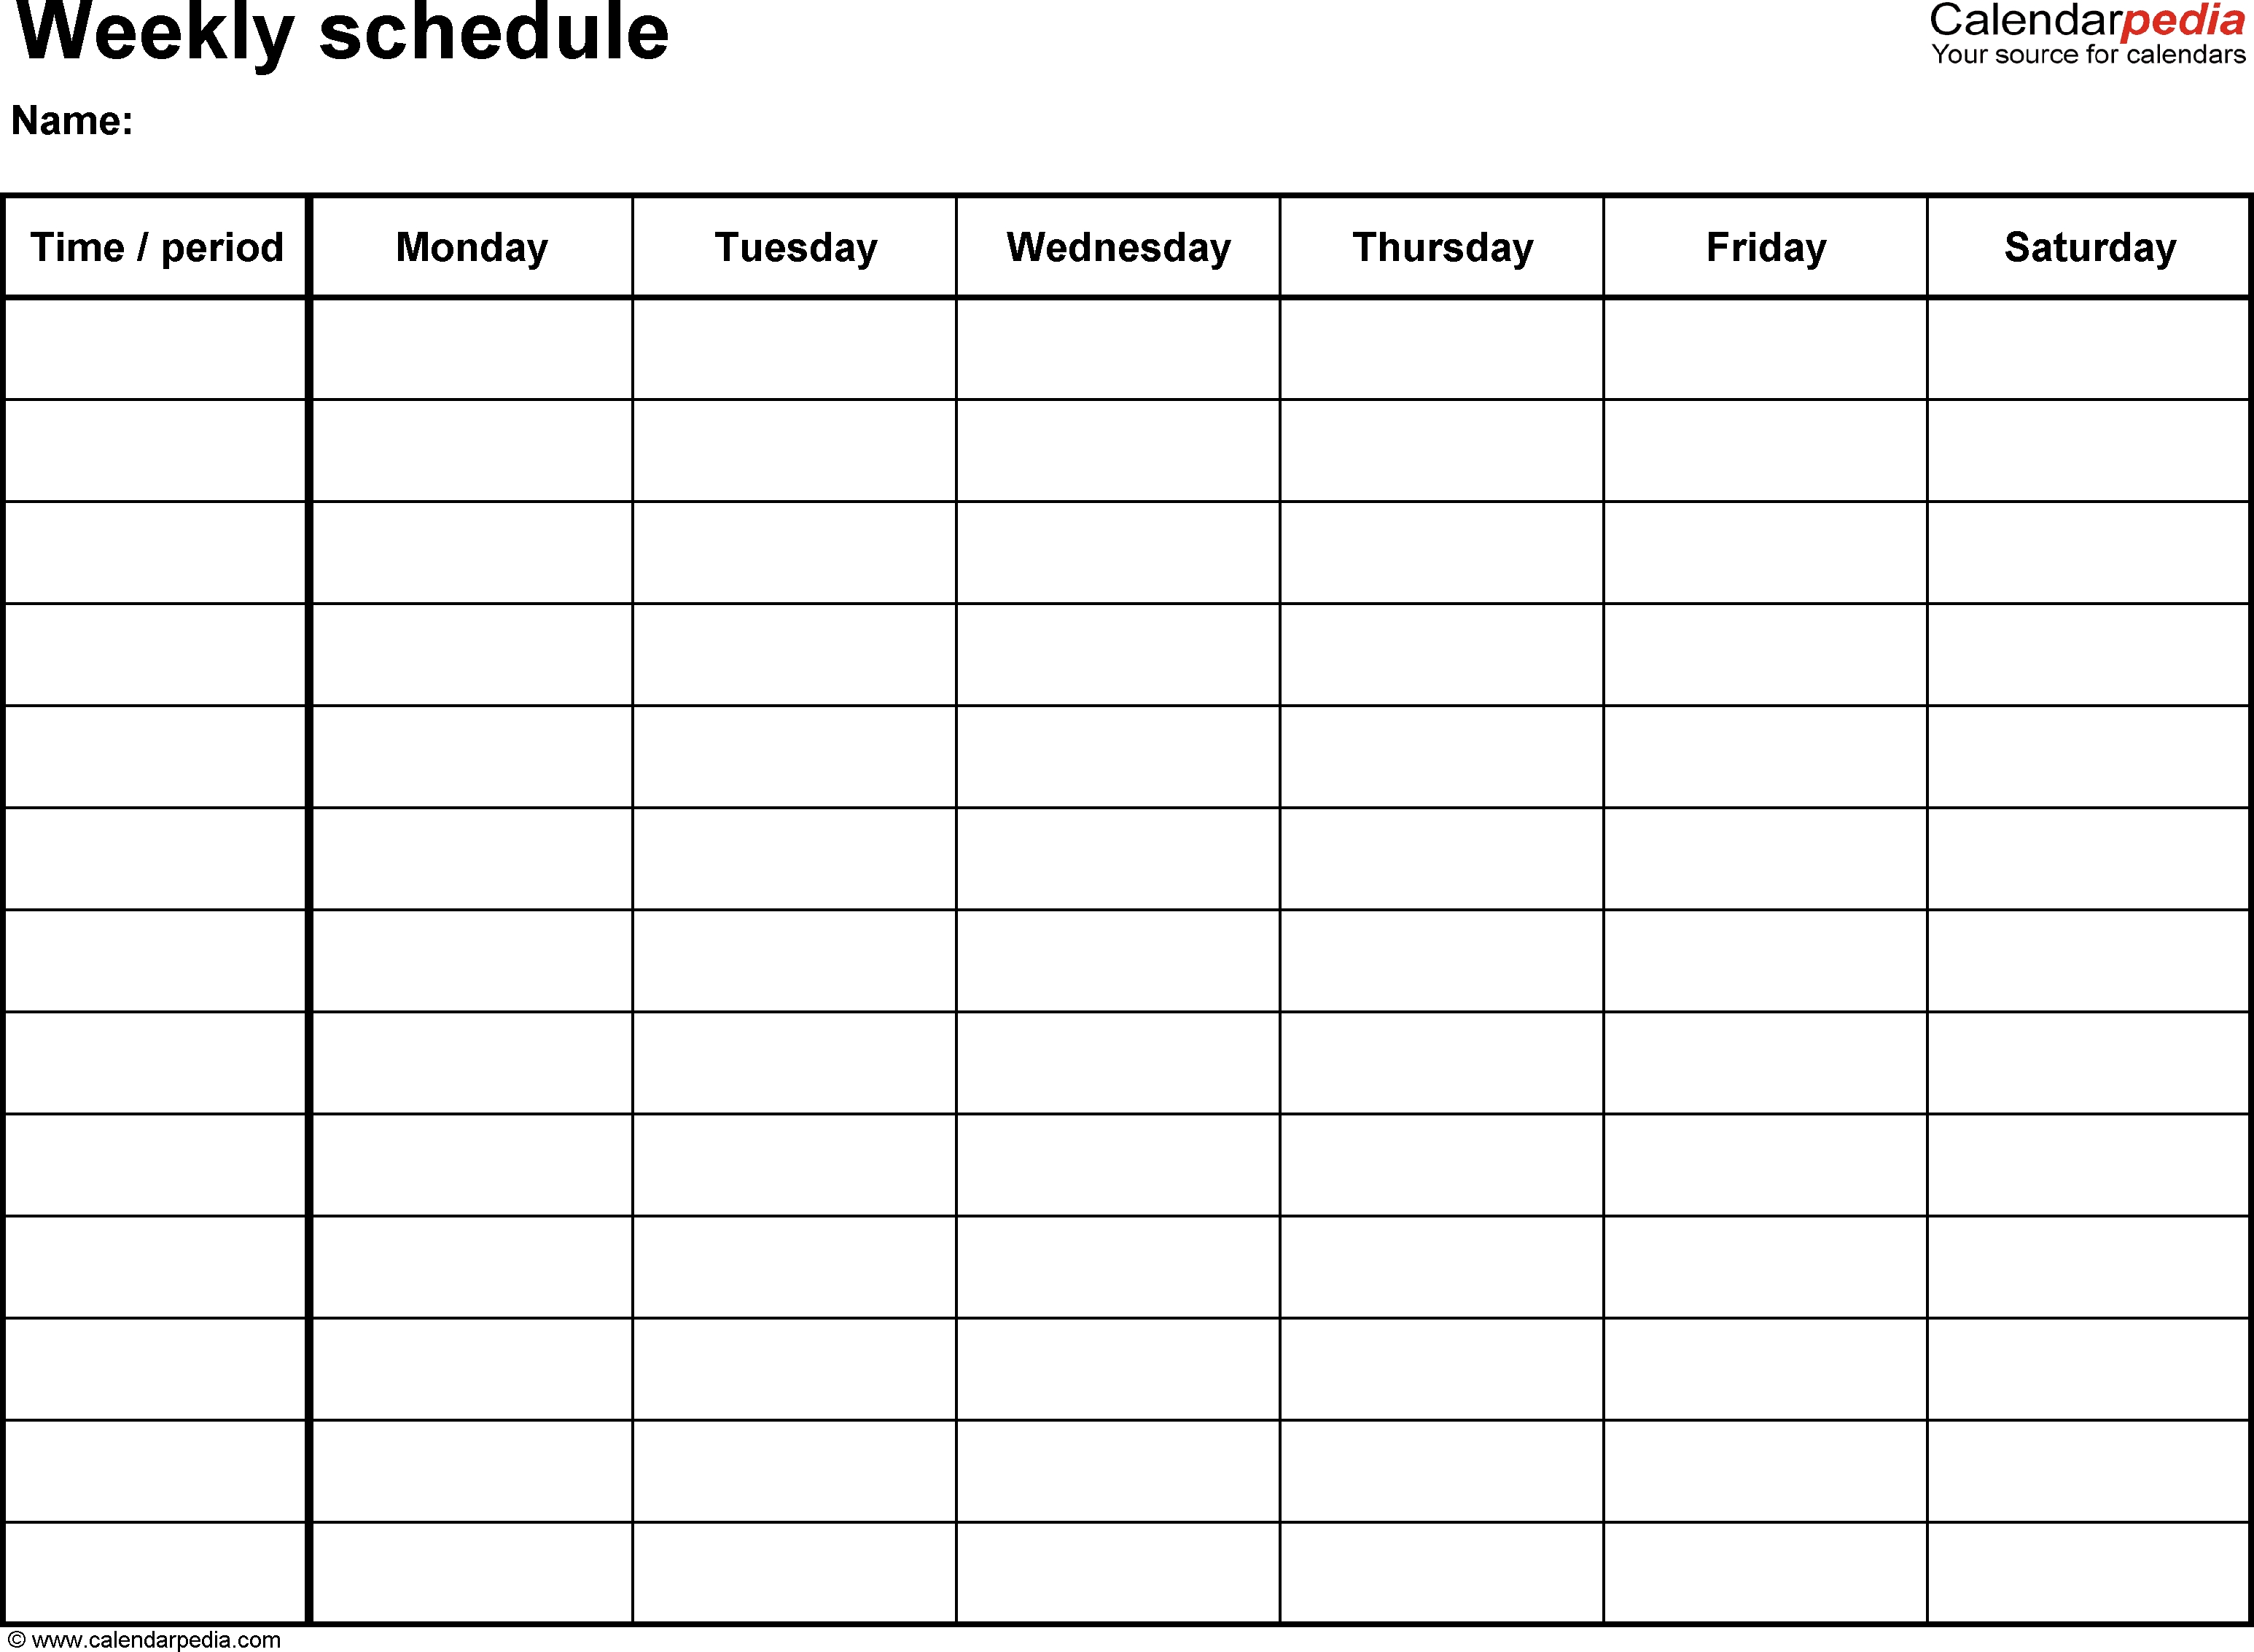 Free Weekly Schedule Templates For Word - 18 Templates intended for 6 Week Blank Calendar Printable